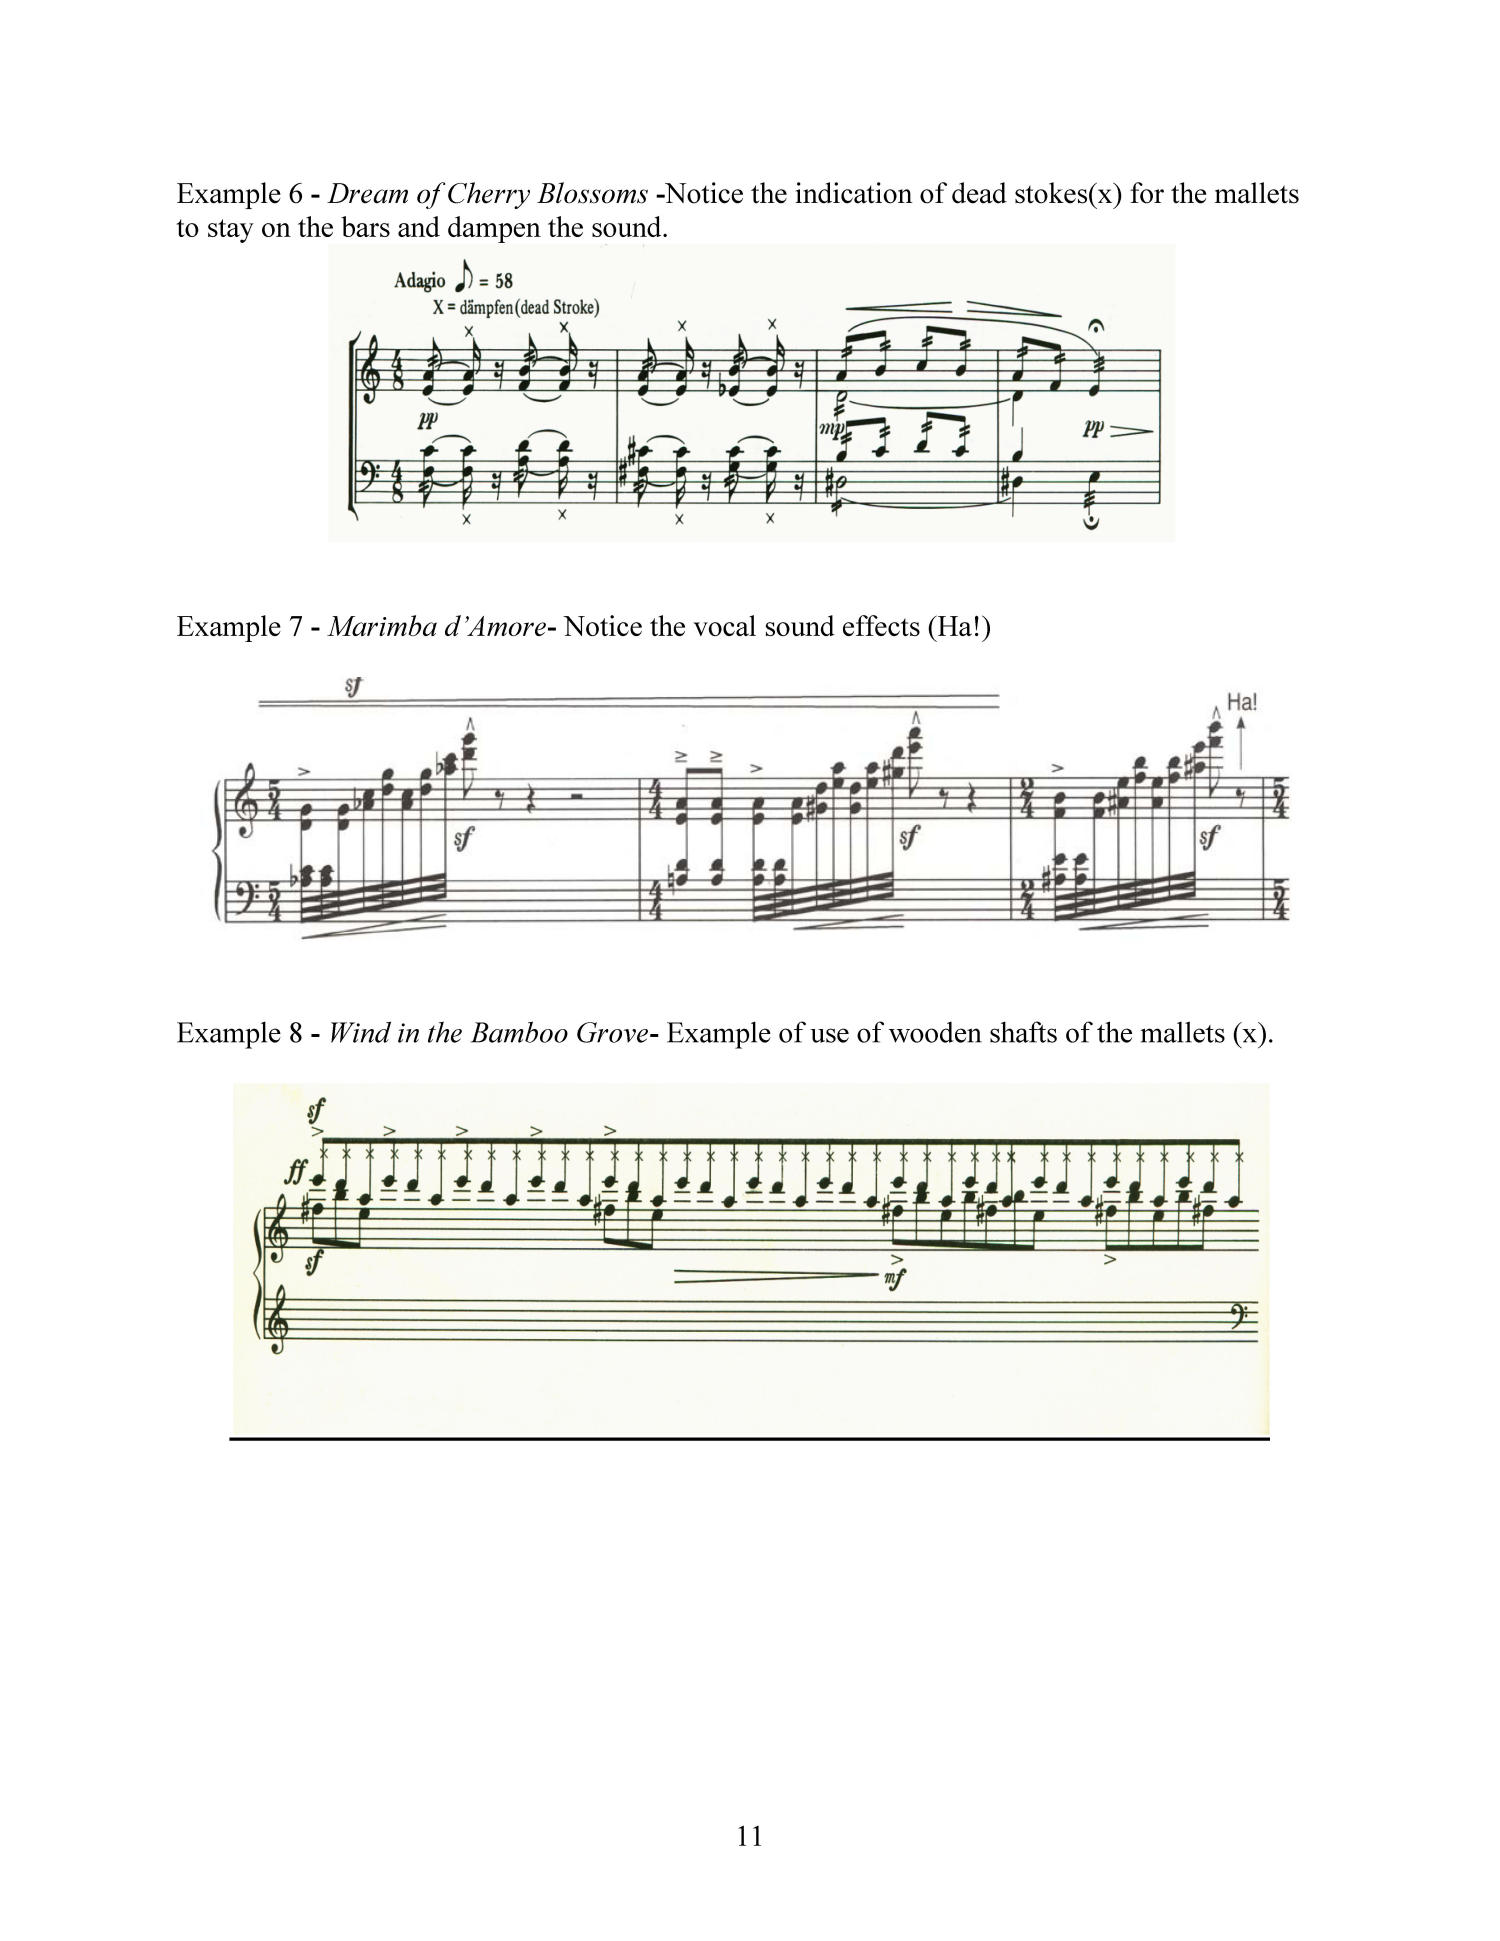 A Performance Guide and Theorical Study of Keiko Abe's Marimba d'Amore and Prism Rhapsody for Marimba and Orchestra
                                                
                                                    11
                                                